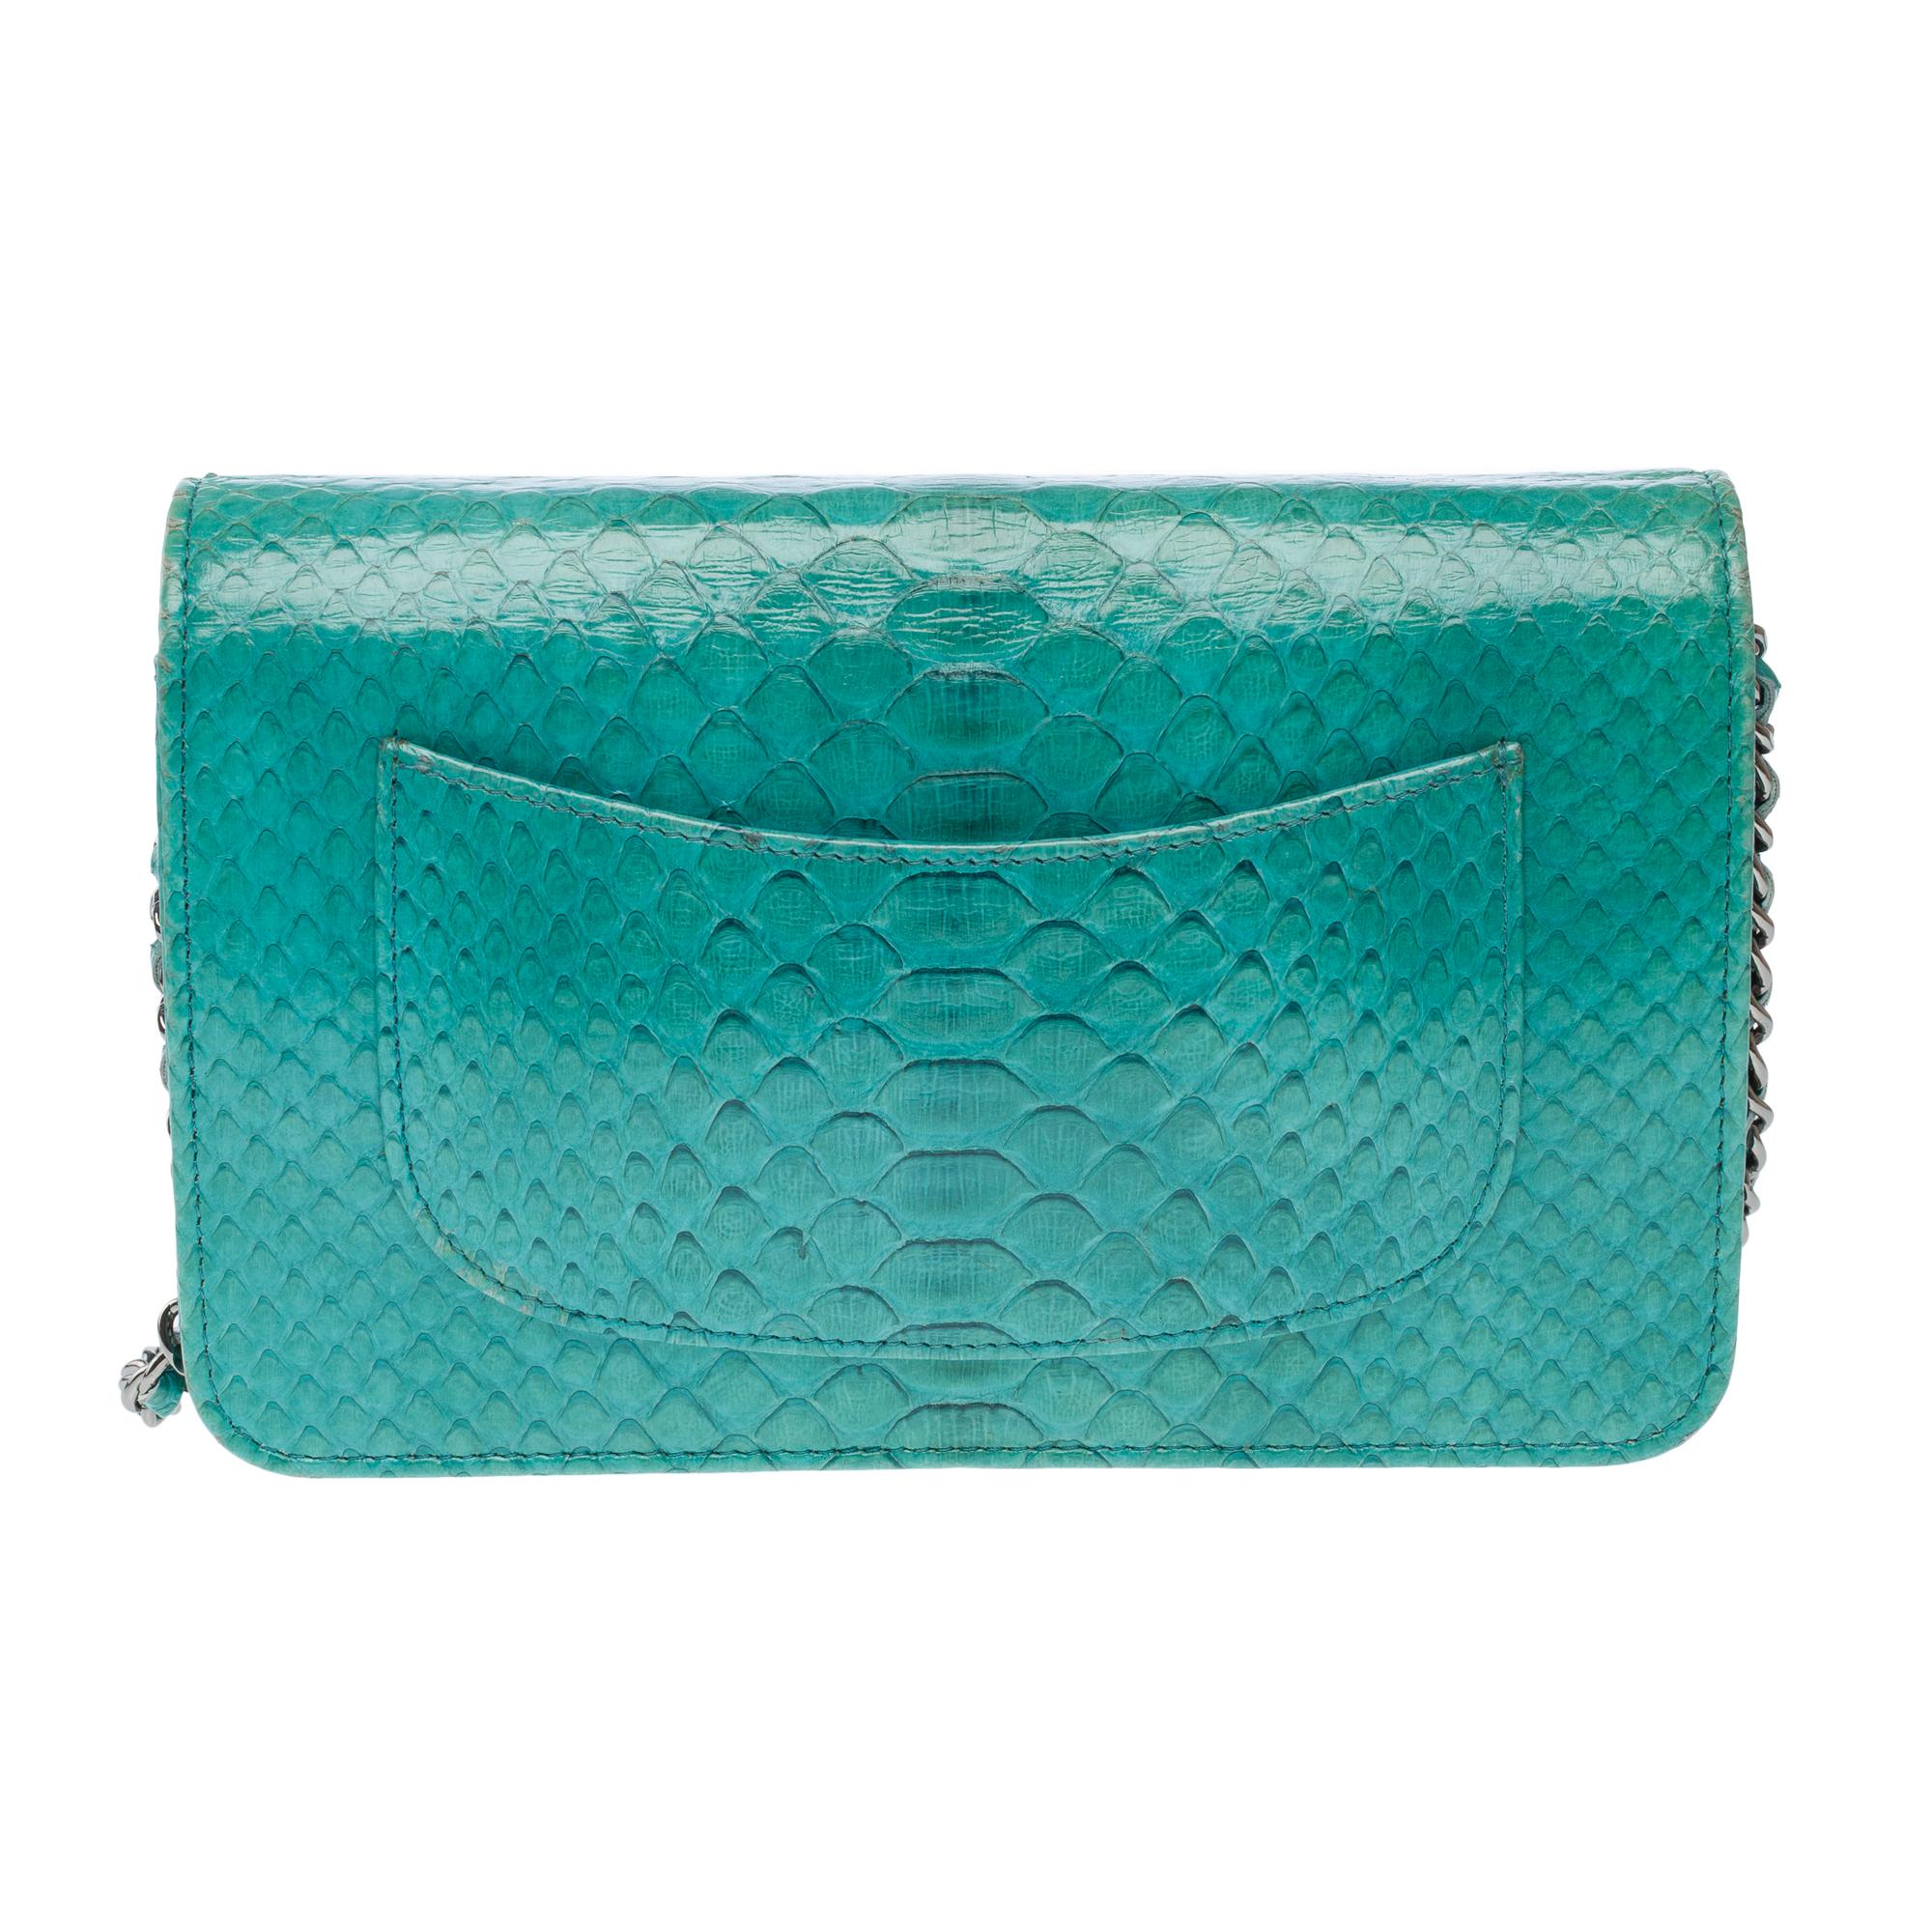 Chanel Wallet on Chain (WOC)  shoulder bag in Turquoise Blue Python leather, SHW 1